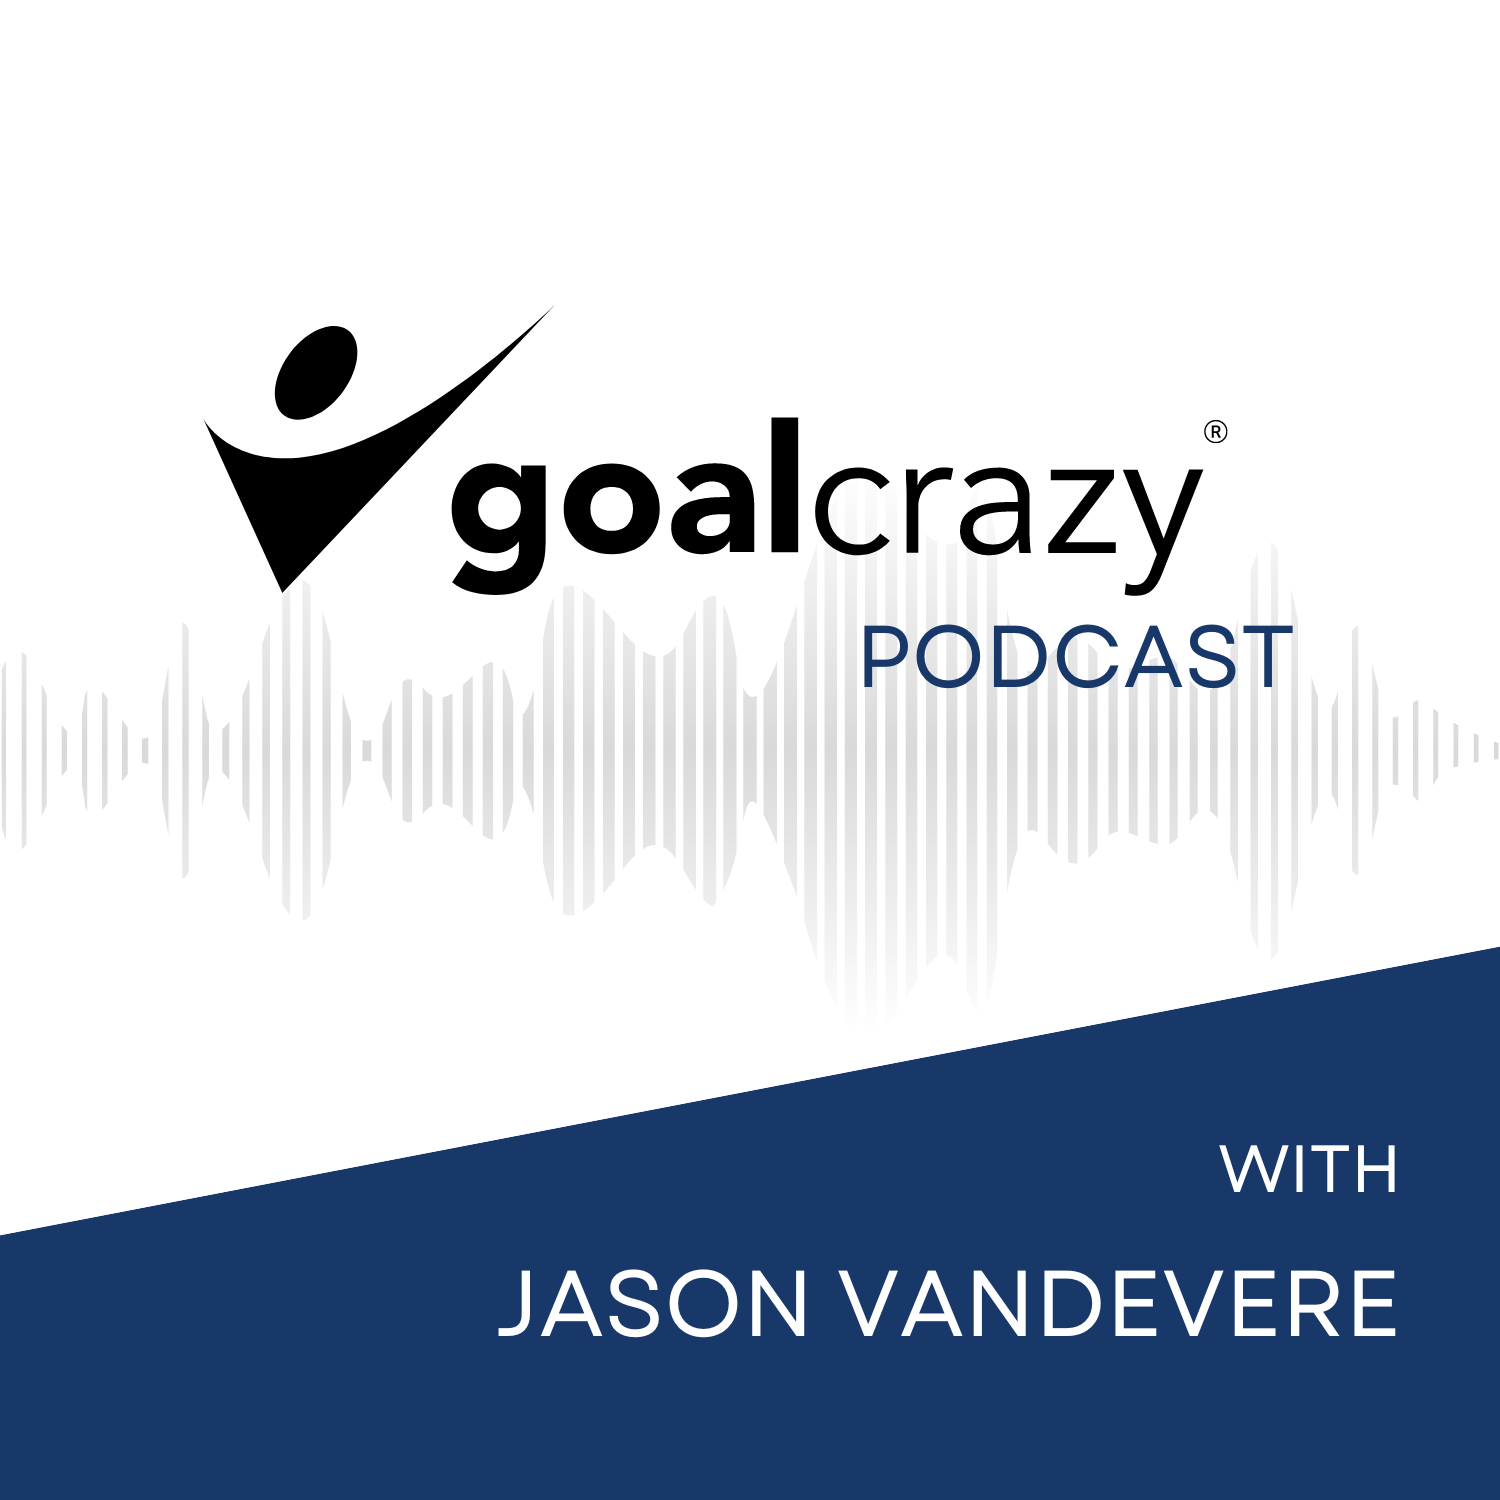 022: Follow Your Goals Without Compromise ft. Athletic Brewing Co-Founder, John Walker